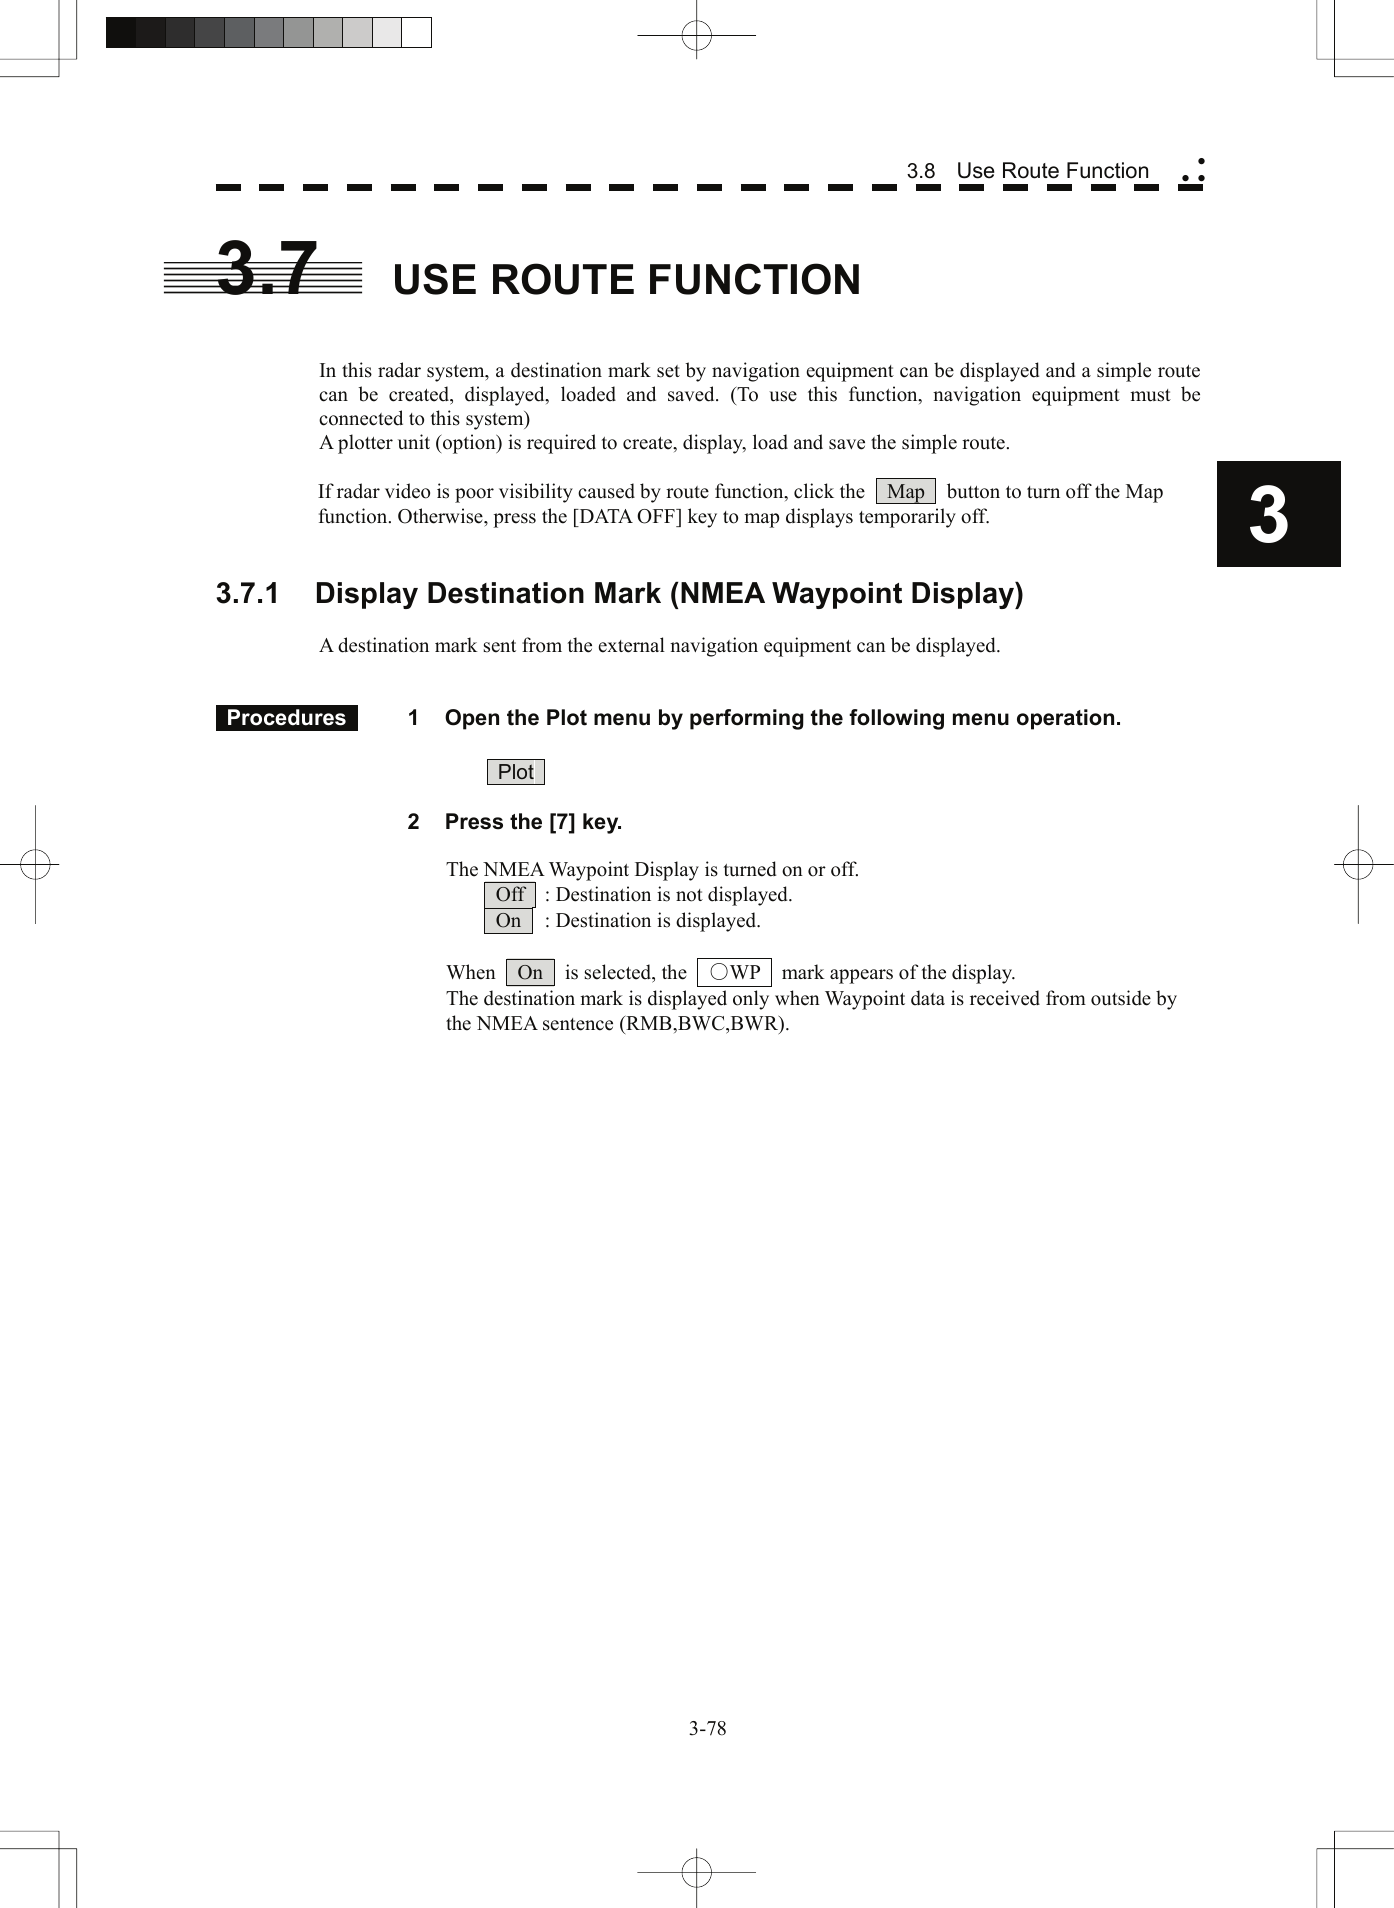  3 3.8  Use Route Function yy y3.7  USE ROUTE FUNCTION   In this radar system, a destination mark set by navigation equipment can be displayed and a simple route can be created, displayed, loaded and saved. (To use this function, navigation equipment must be connected to this system) A plotter unit (option) is required to create, display, load and save the simple route.  If radar video is poor visibility caused by route function, click the    Map    button to turn off the Map function. Otherwise, press the [DATA OFF] key to map displays temporarily off.   3.7.1 Display Destination Mark (NMEA Waypoint Display)  A destination mark sent from the external navigation equipment can be displayed.    Procedures   1  Open the Plot menu by performing the following menu operation.   Plot     2  Press the [7] key.    The NMEA Waypoint Display is turned on or off.   Off    : Destination is not displayed.   On    : Destination is displayed.  When    On    is selected, the    ○WP    mark appears of the display.   The destination mark is displayed only when Waypoint data is received from outside by the NMEA sentence (RMB,BWC,BWR).   3-78 